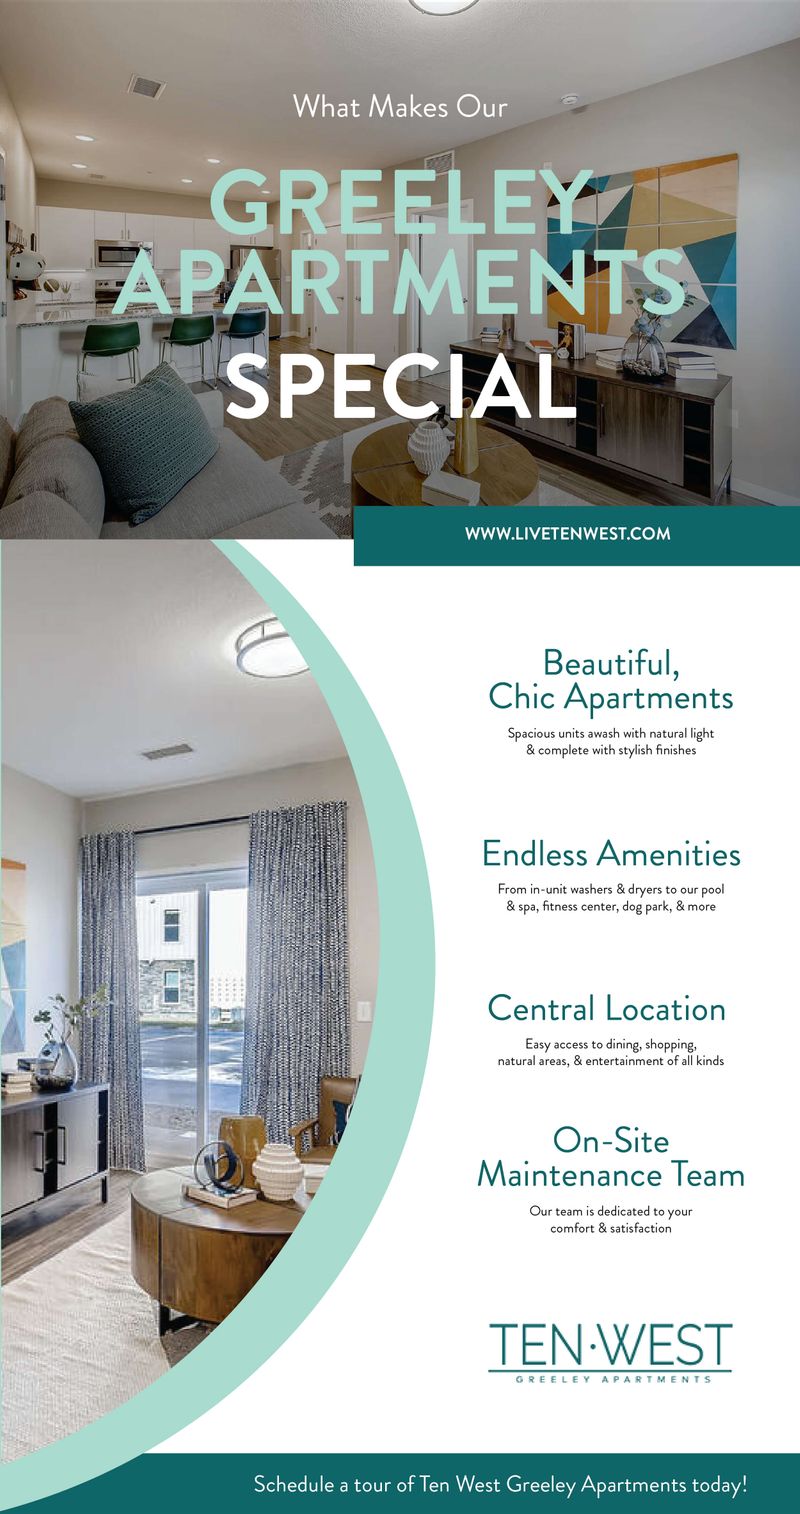 M35105 - Infographic - What Makes Our Greeley, CO Apartments Special-01 (1).jpg